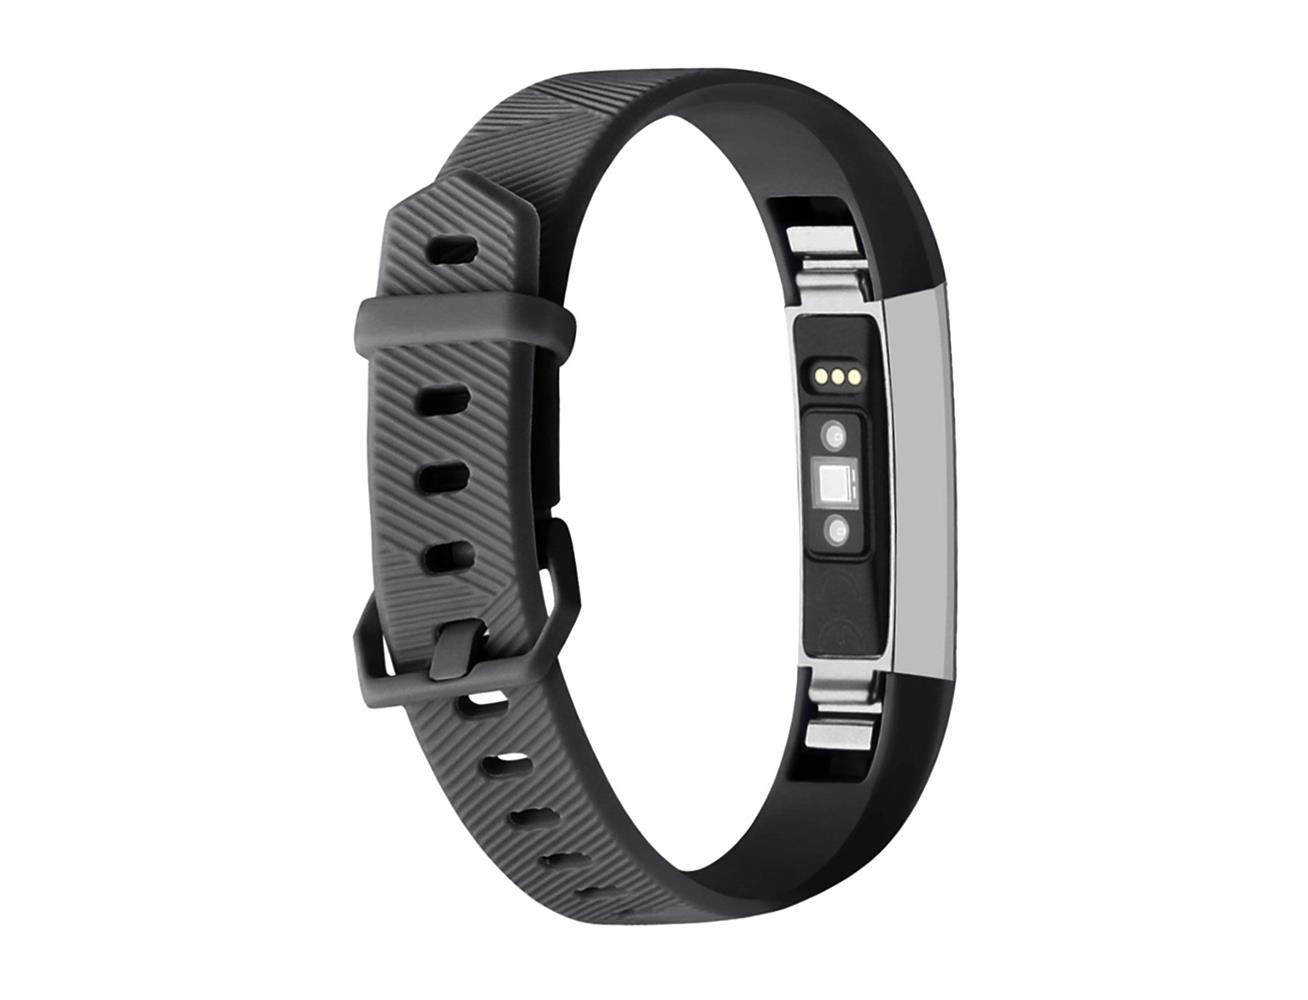 download fitbit connect for windows 10